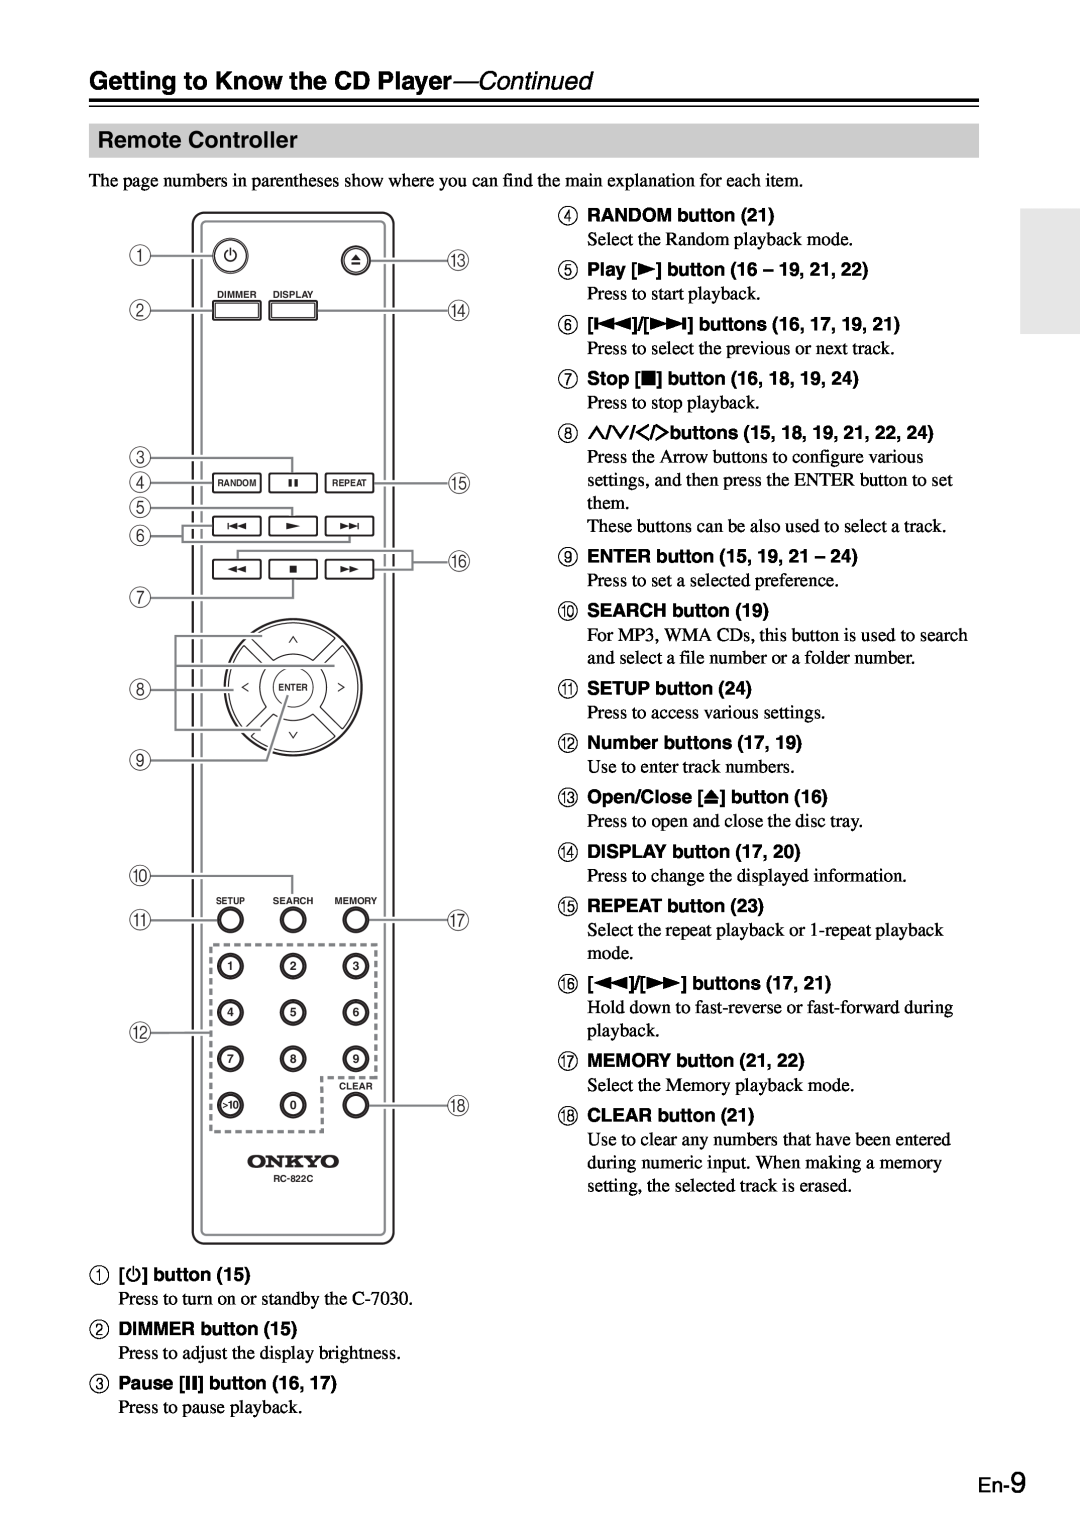 Onkyo C-7030 instruction manual Remote Controller, En-9, Getting to Know the CD Player-Continued 